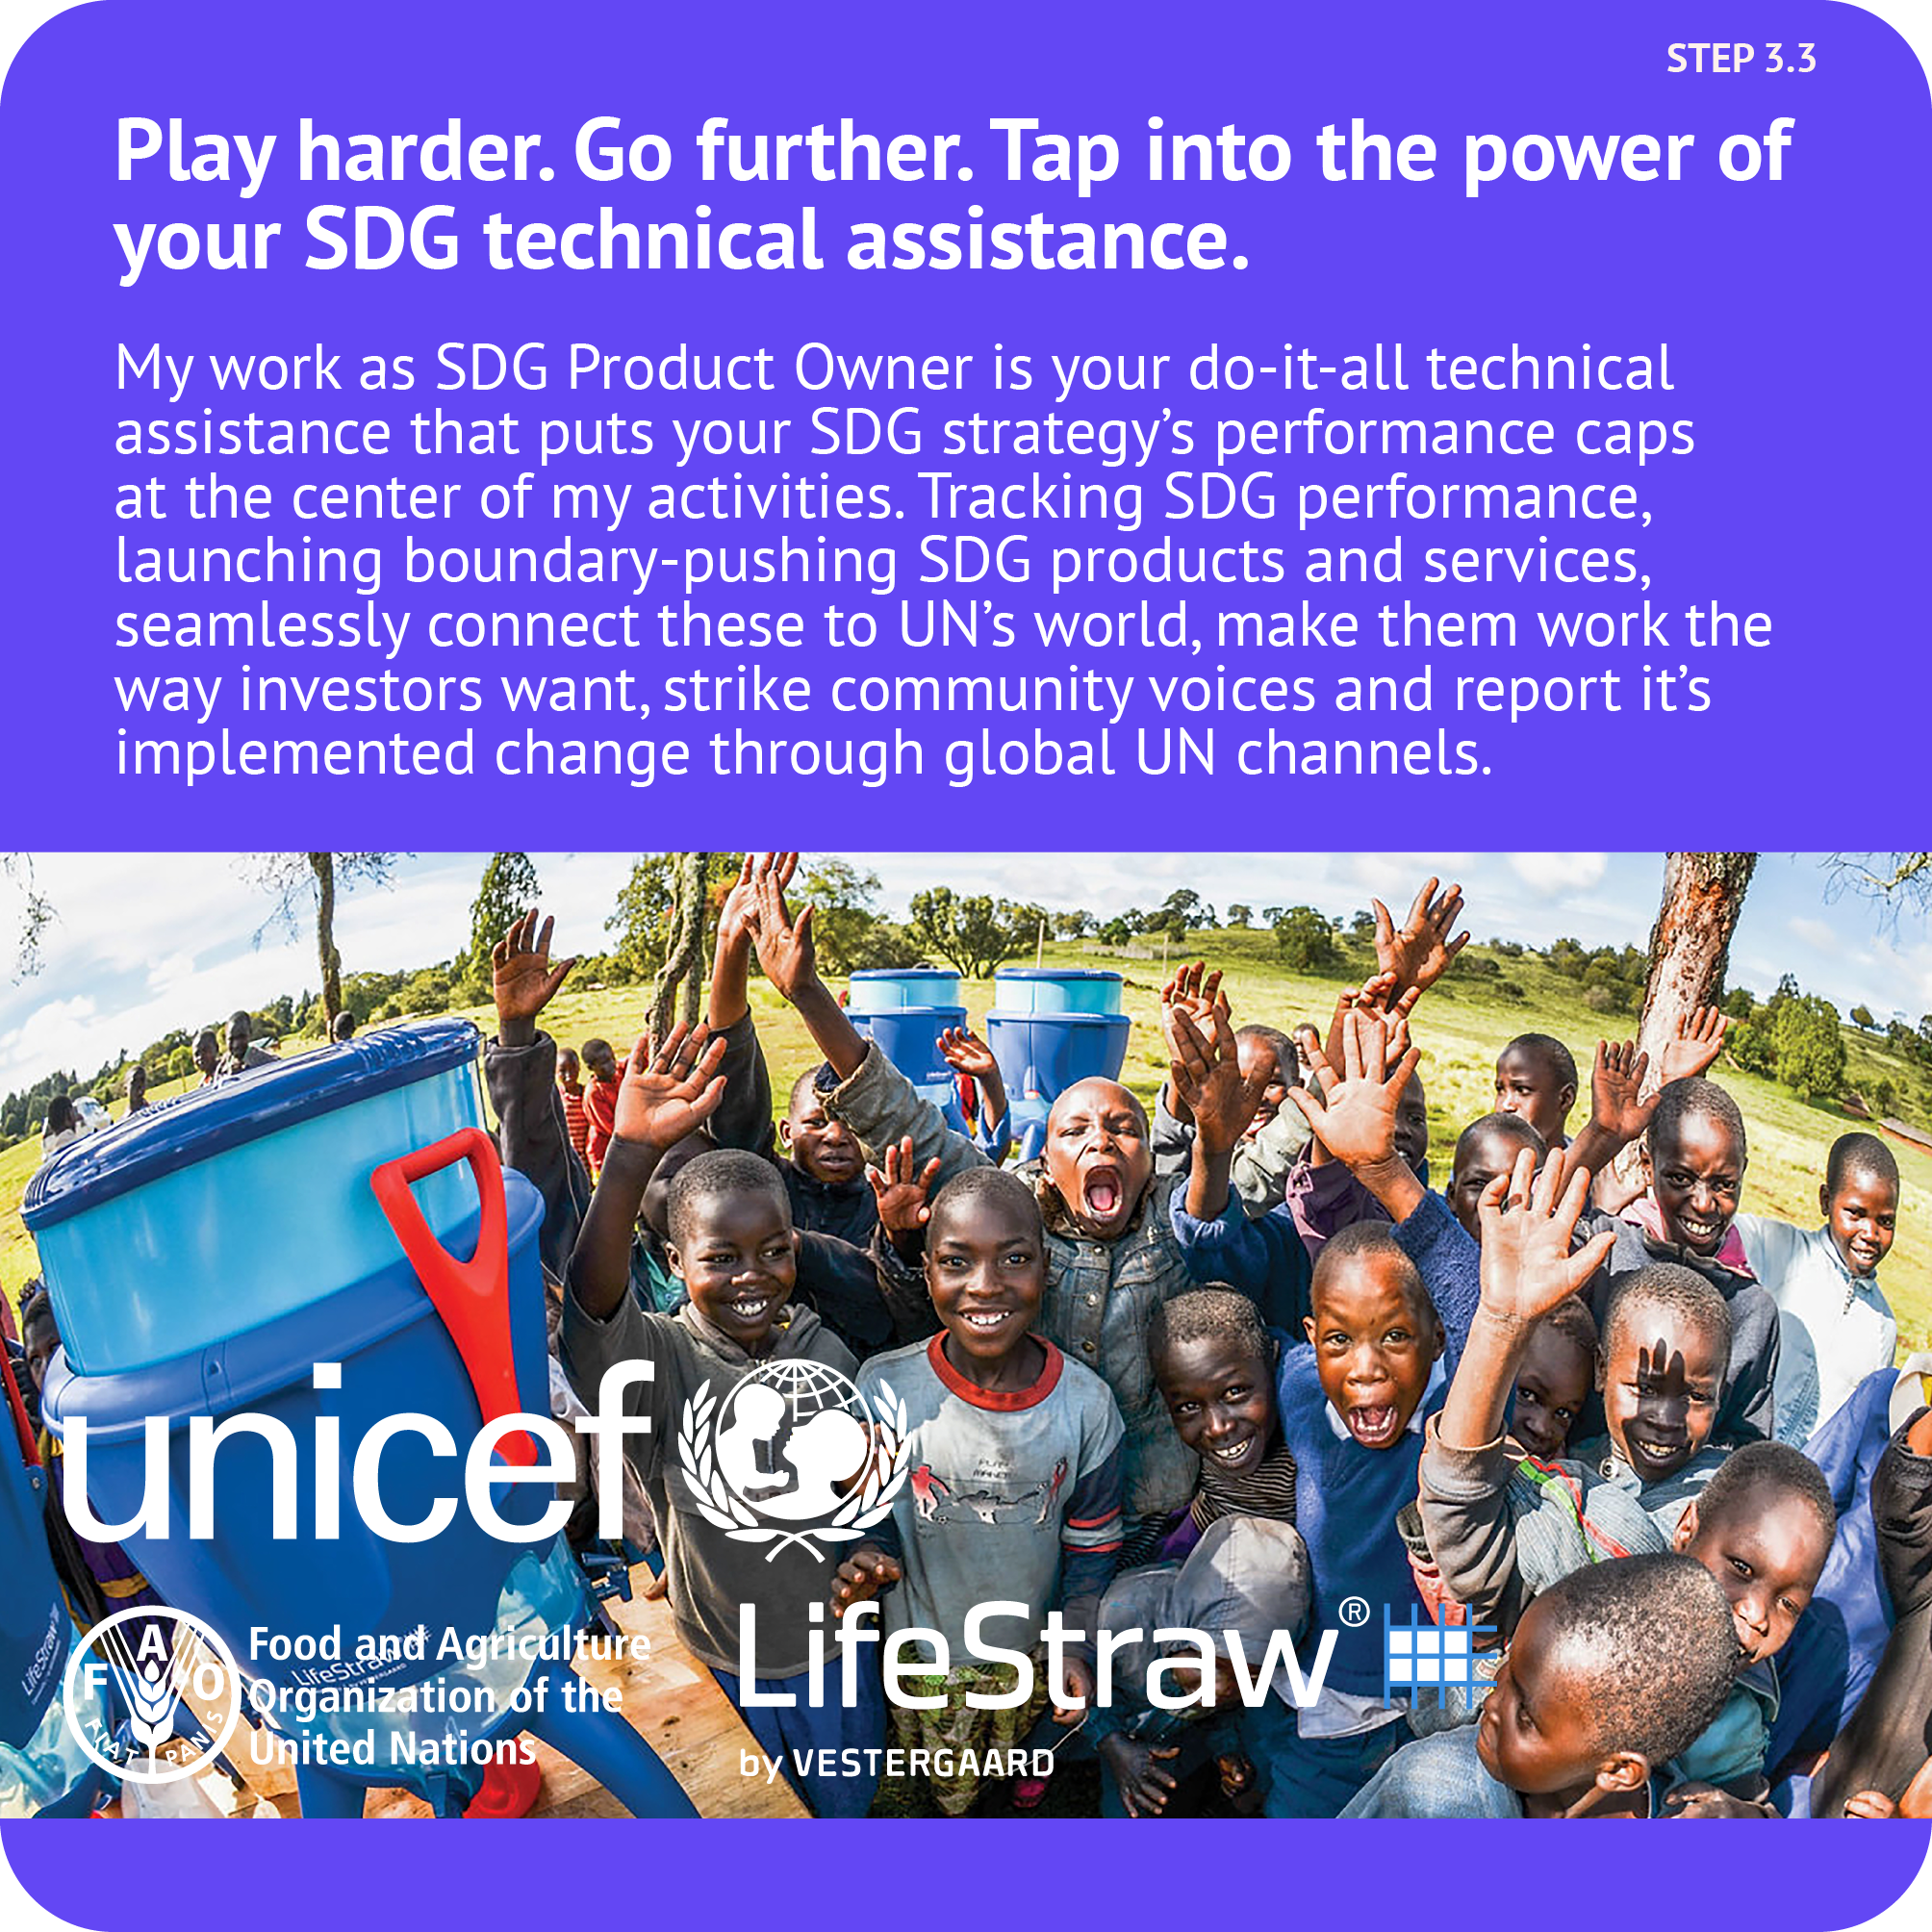 INDD-PNG E - MsSL - CARD My Areas of Specialism Card SDG Product Owner LifeStraw Community - B17XH17CM RESO300.png